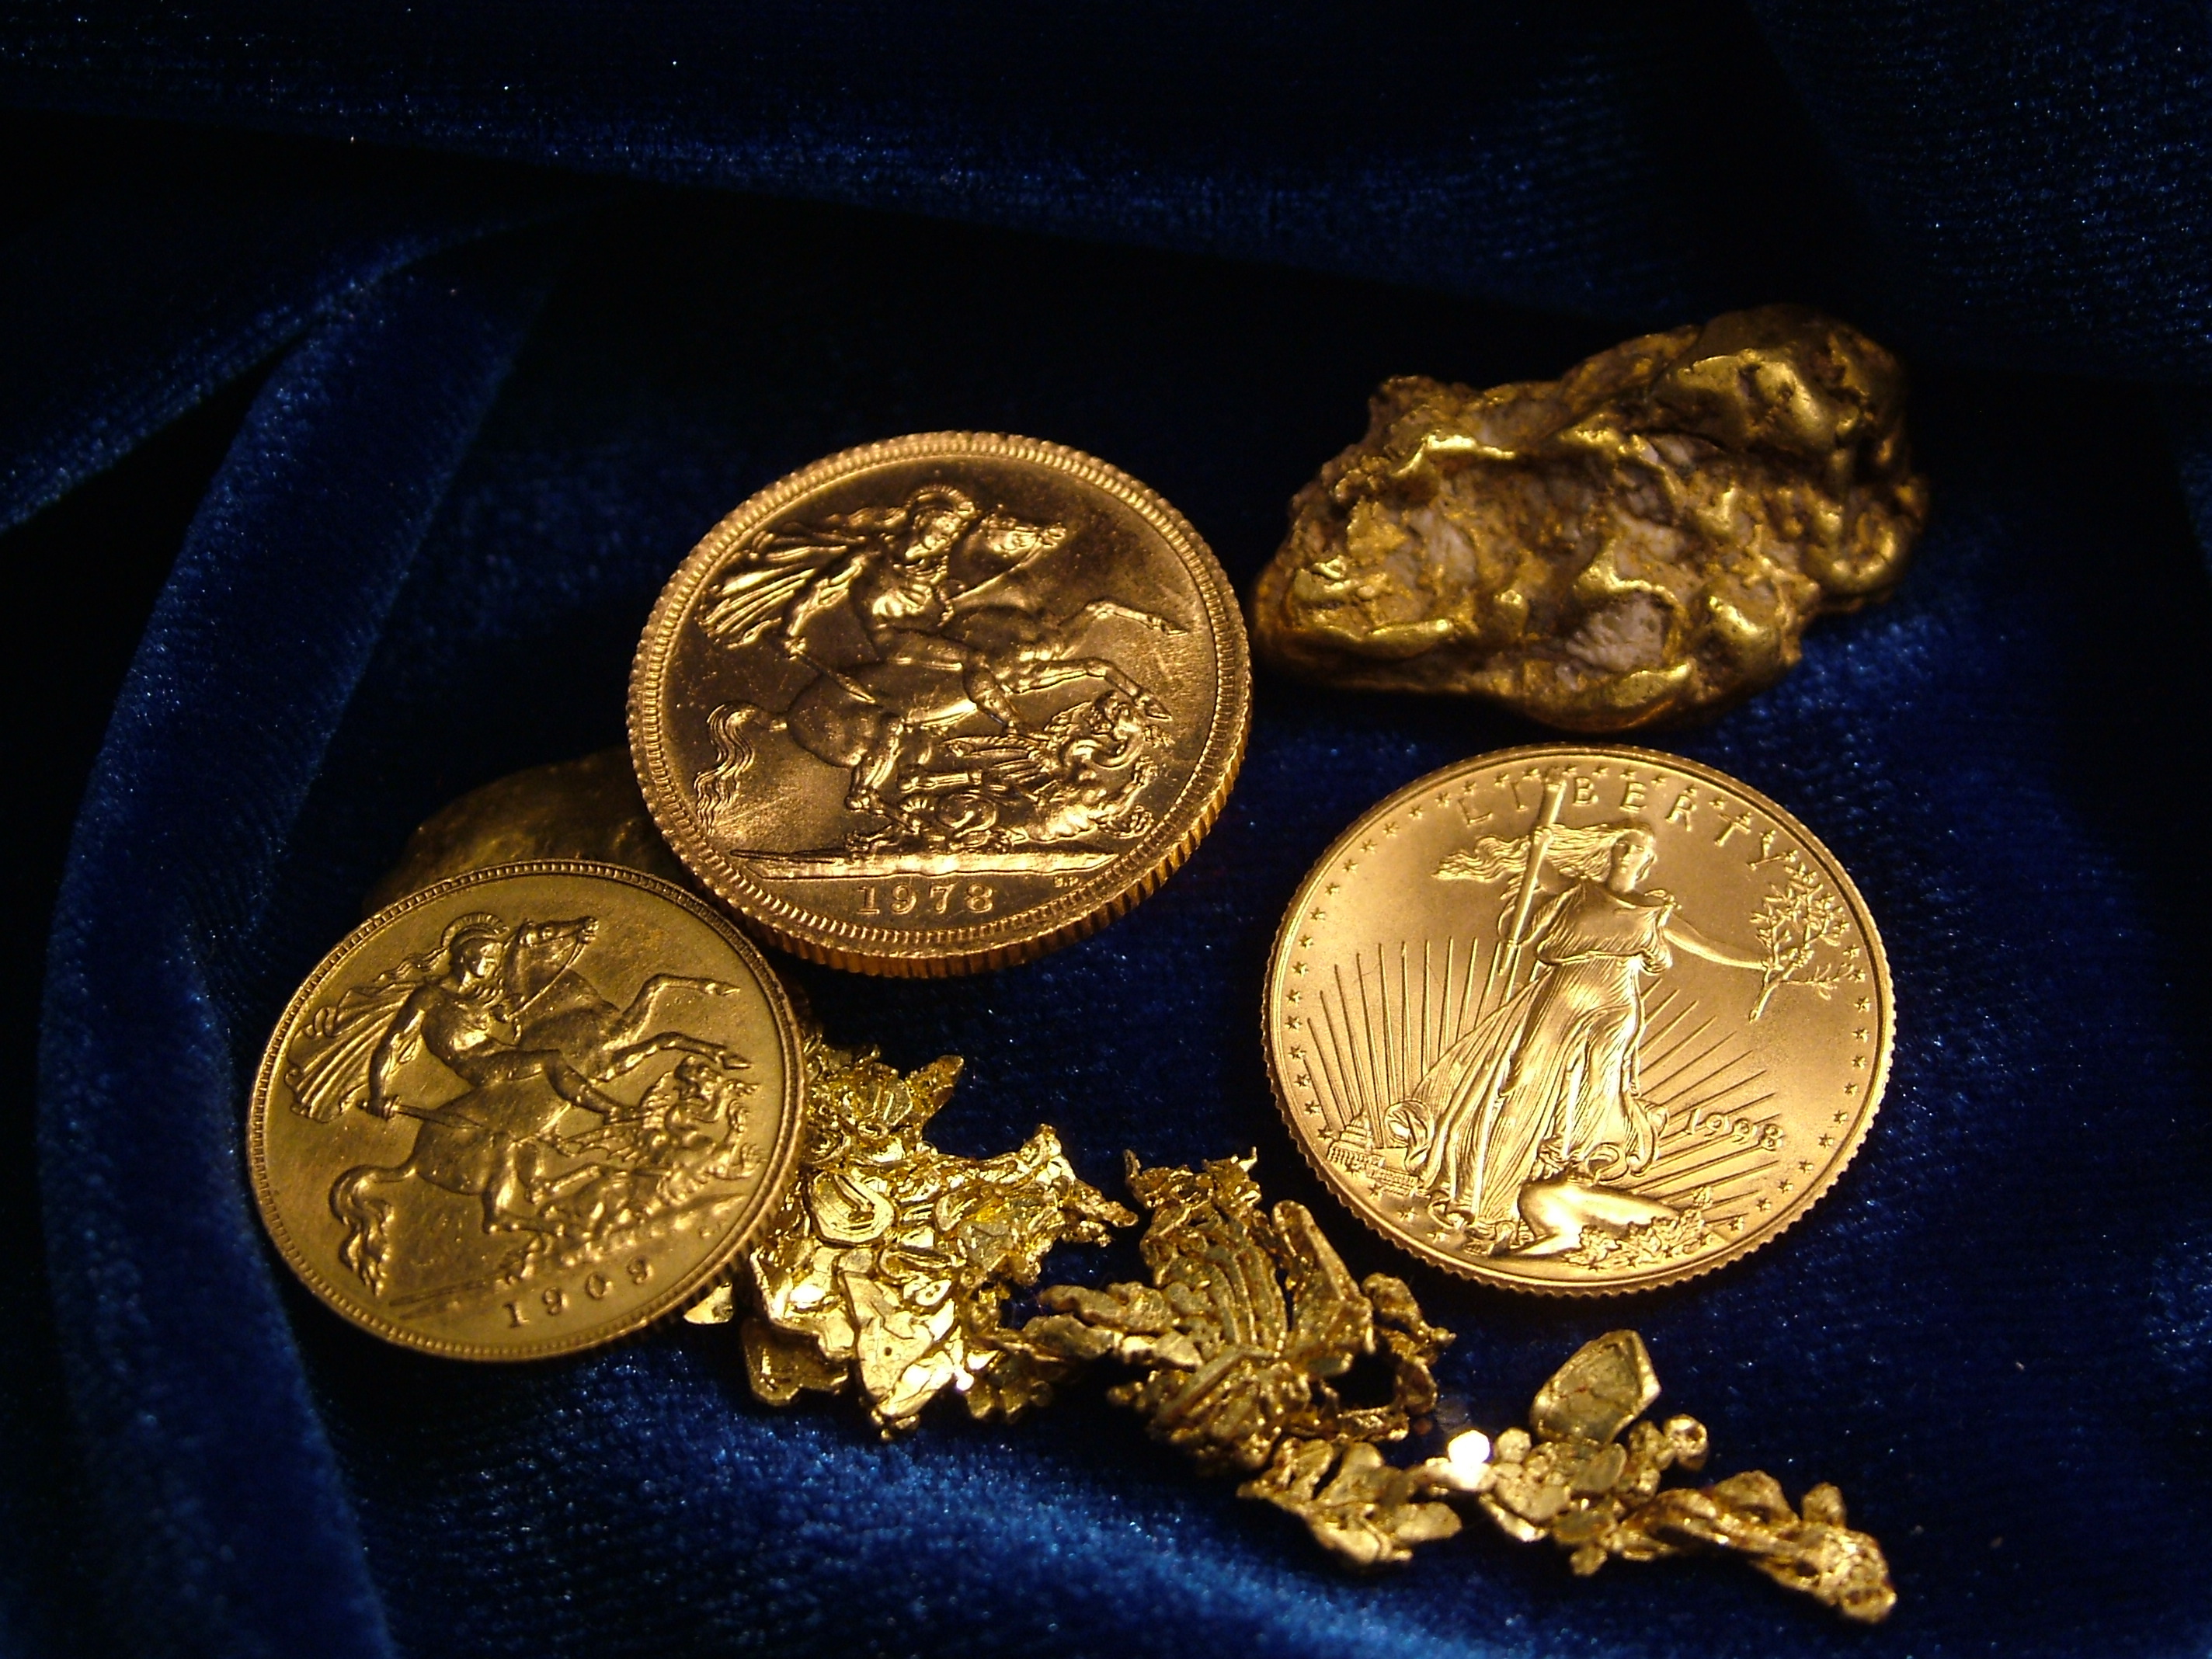 FIVE OF THE RAREST COINS YOU COULD POSSIBLY COME ACROSS ...